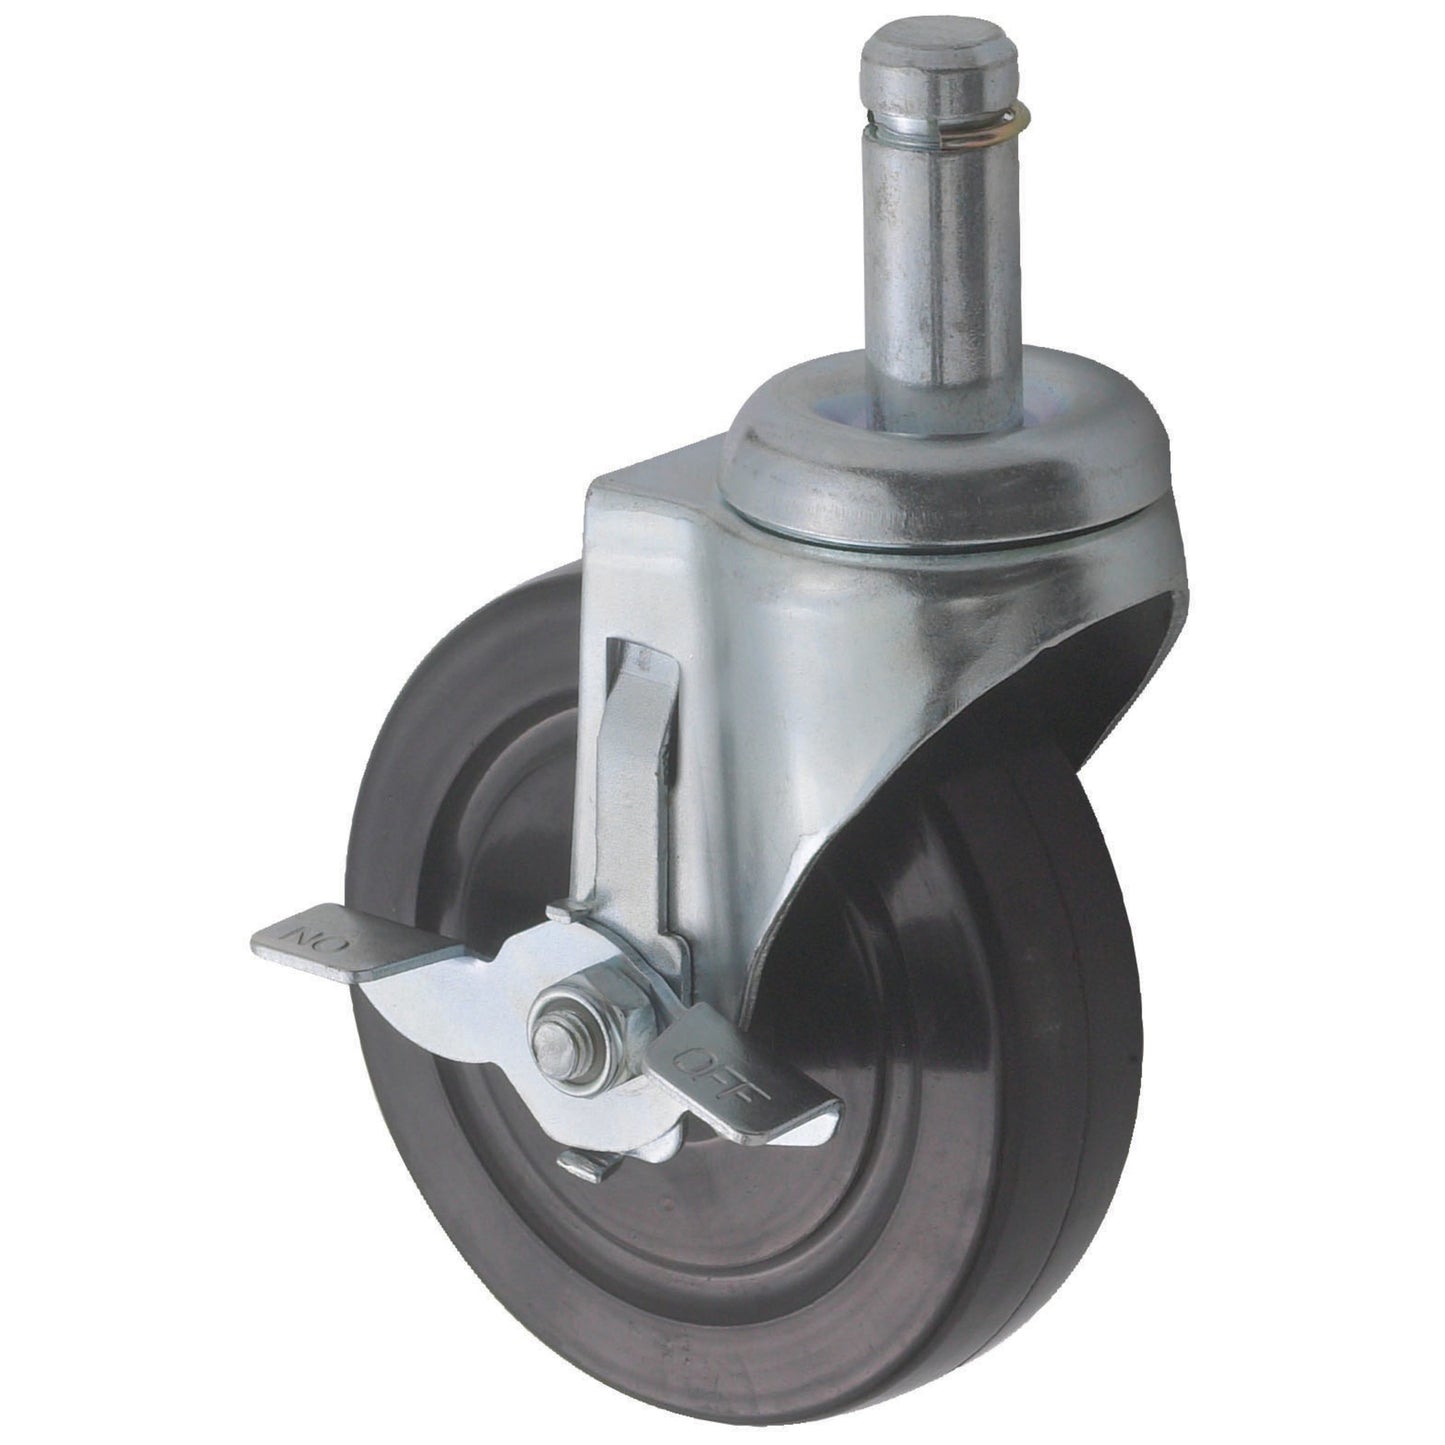 VC-CTB - Caster with Brake for Wire Shelving